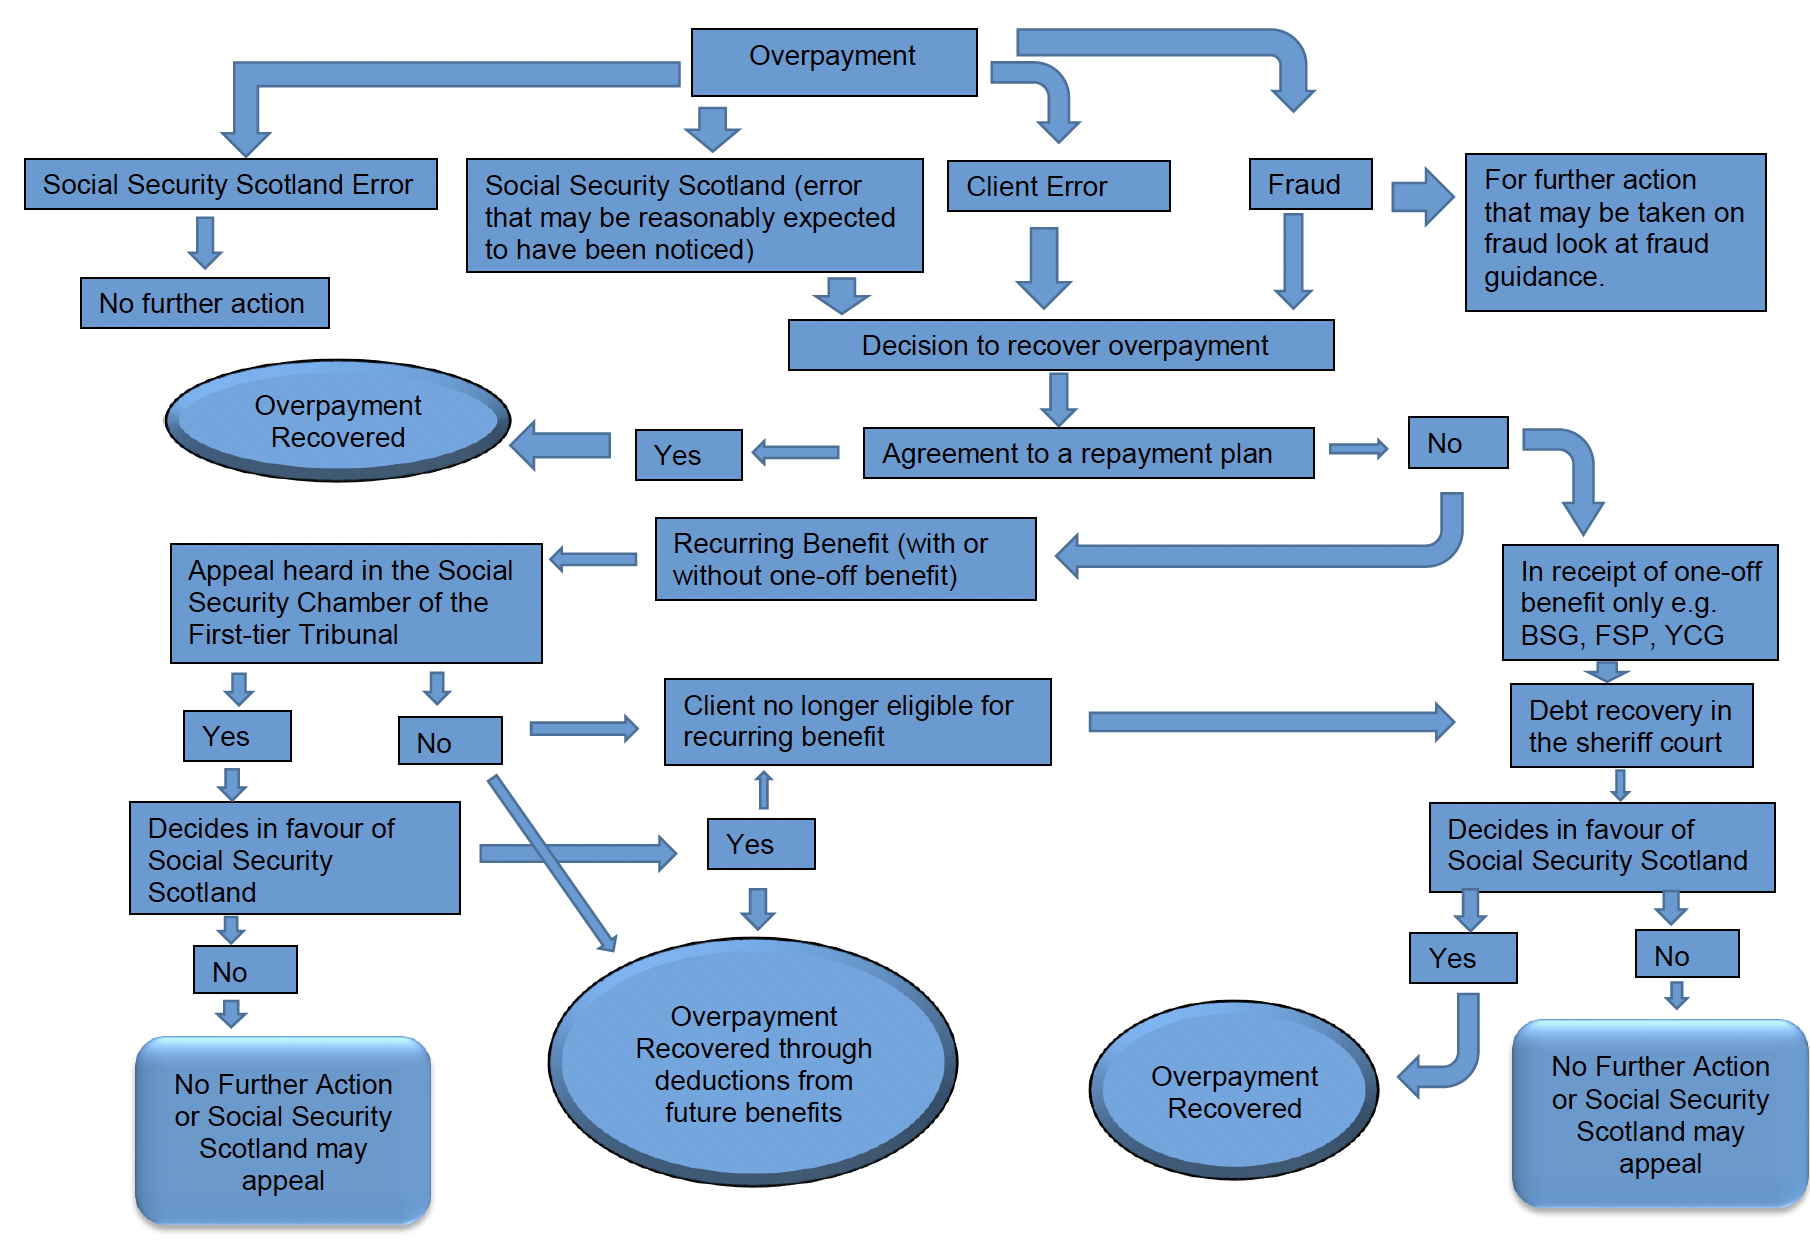 Image showing The process for recovery of overpayments, which is described in text throughout